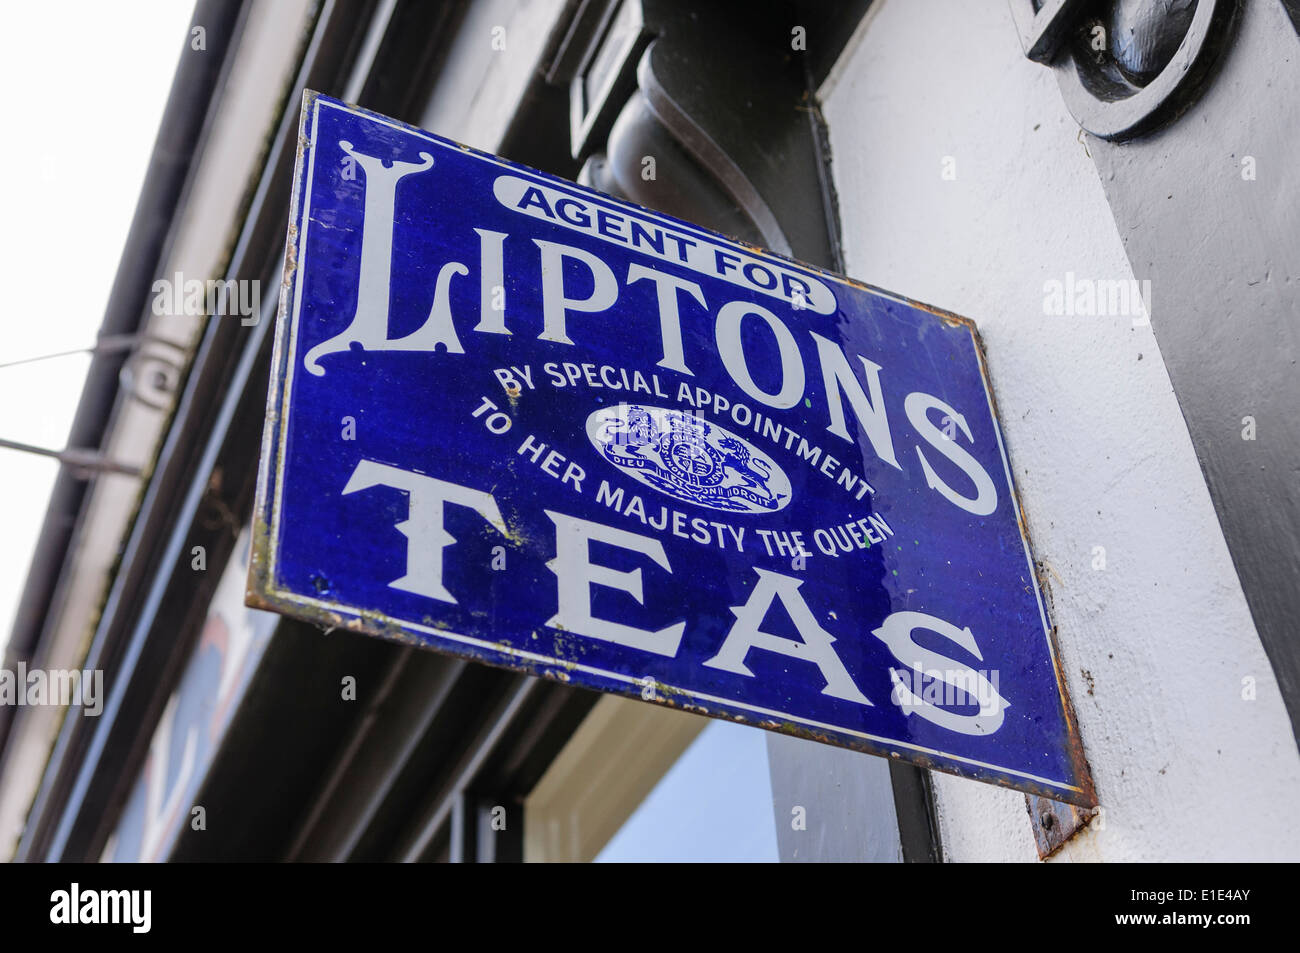 Sign for Liptons Teas outside a shop Stock Photo